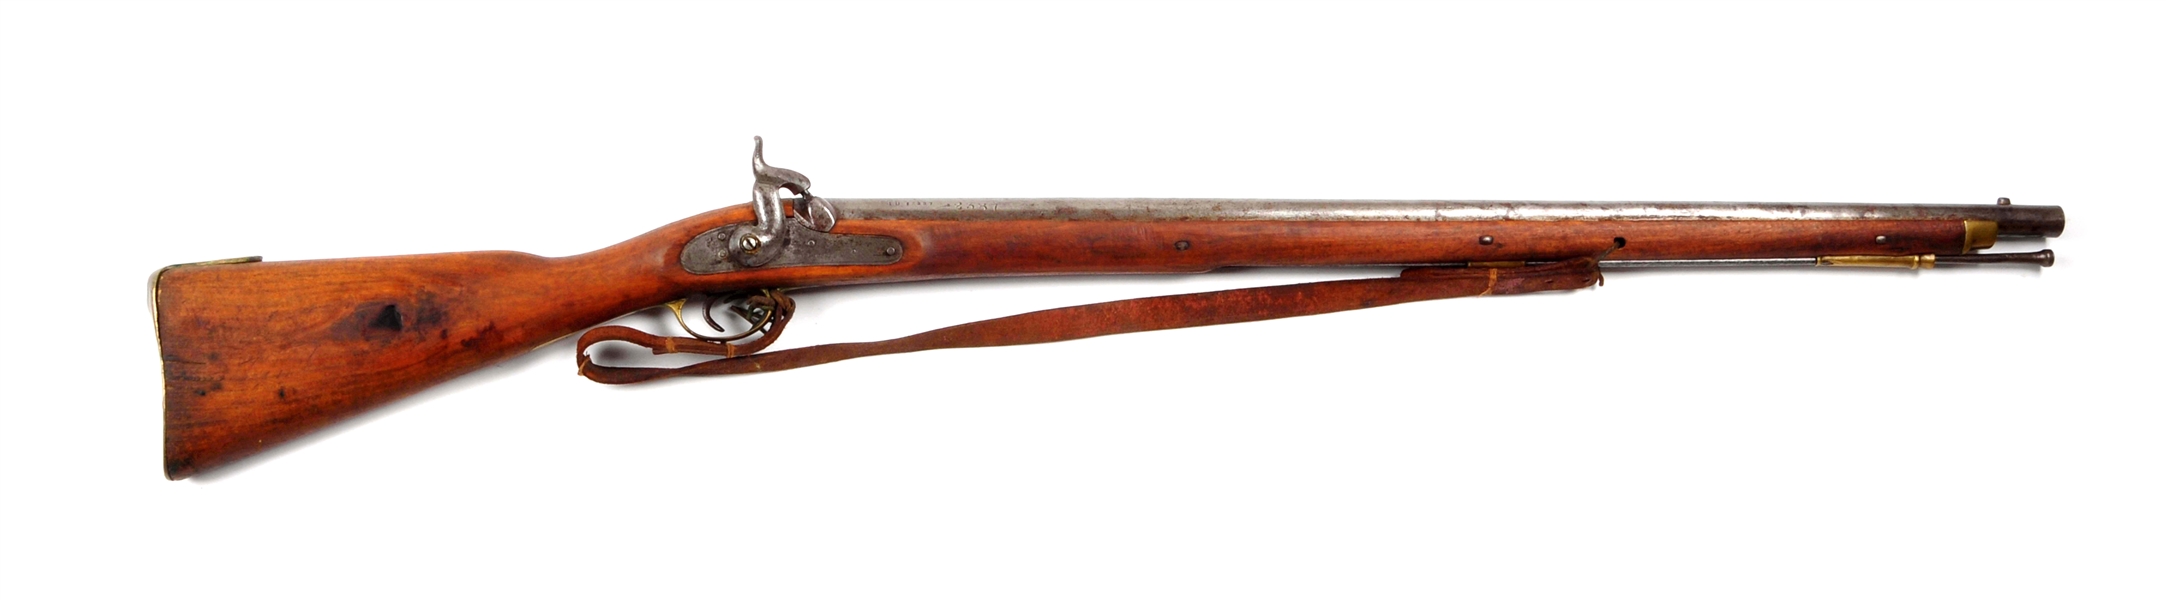 (A) 19TH CENTURY BRITISH TOWER MUSKET.  